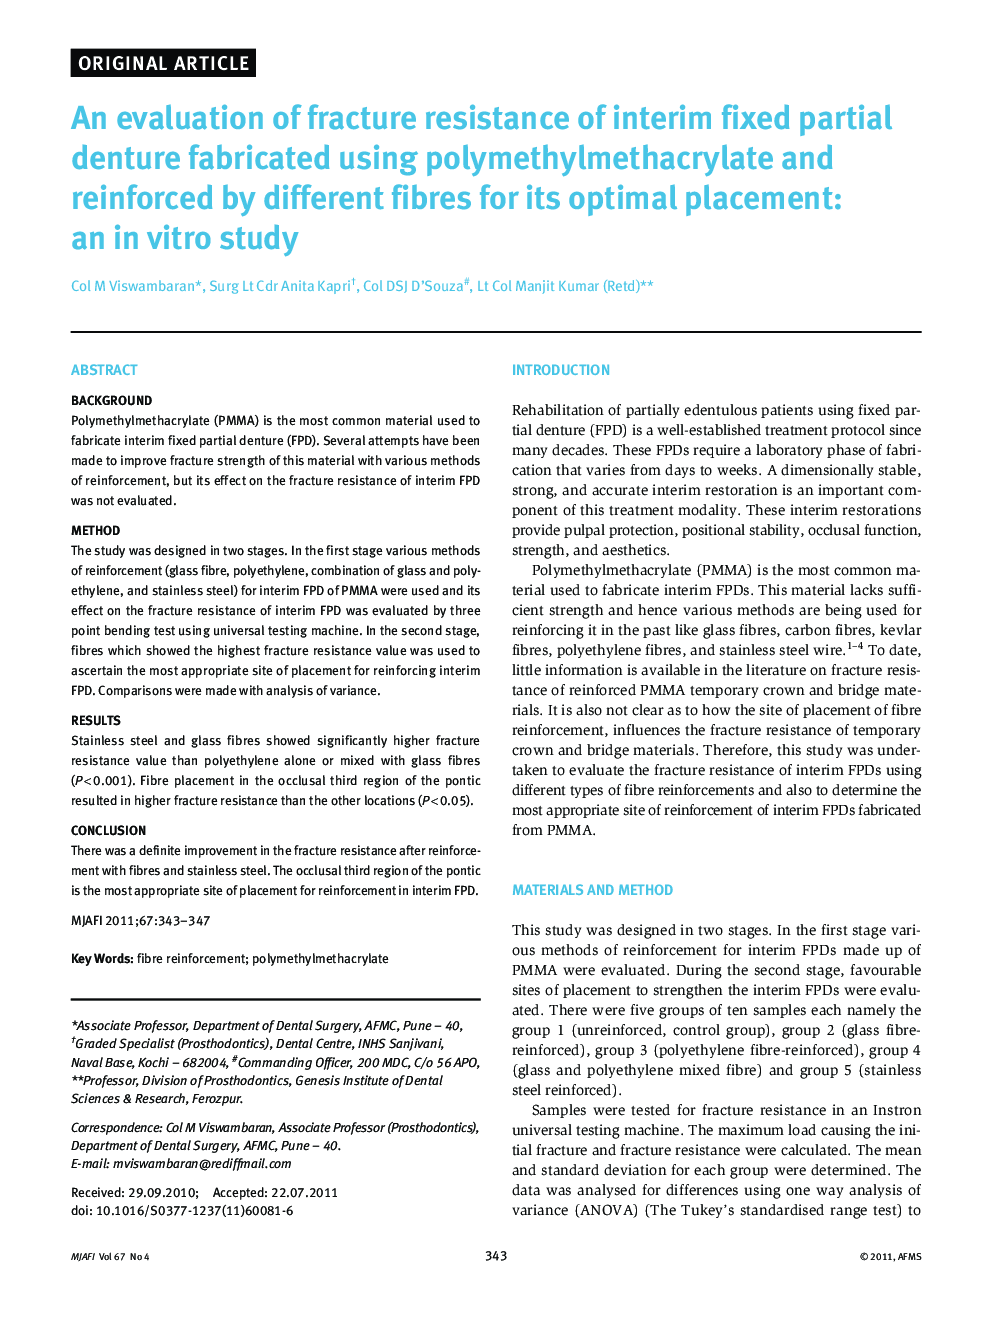 An evaluation of fracture resistance of interim fixed partial denture fabricated using polymethylmethacrylate and reinforced by different fibres for its optimal placement: an in vitro study